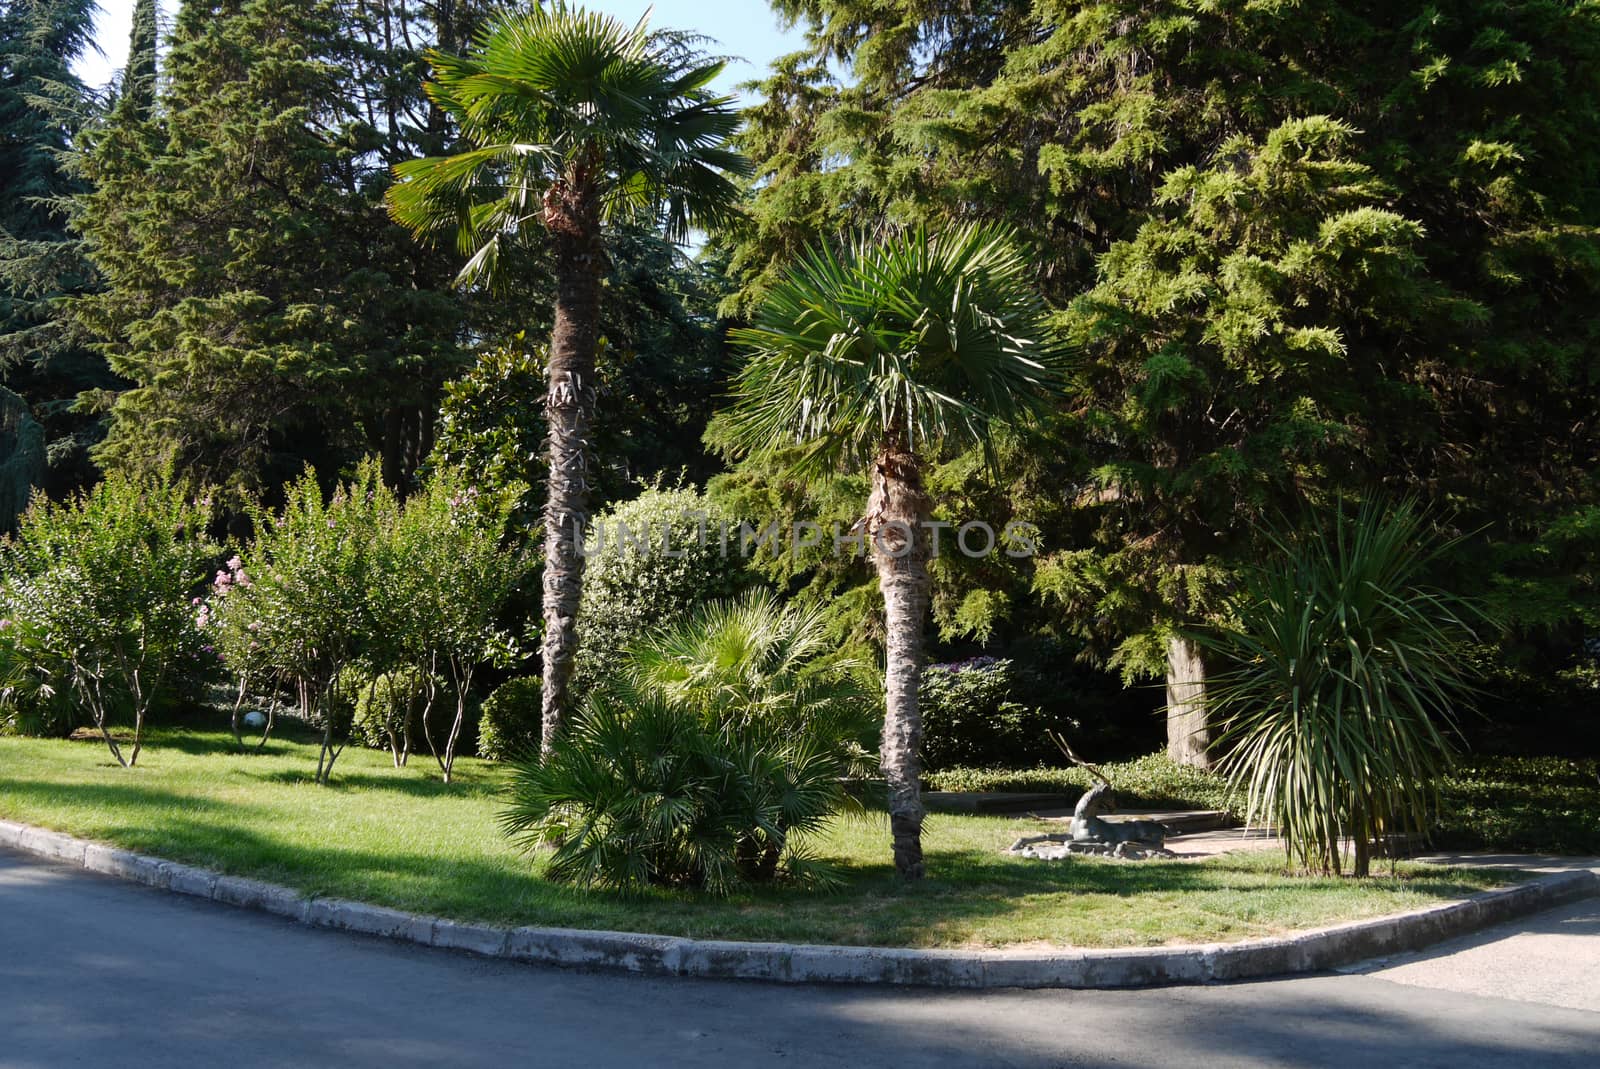 green palm trees in the park on a beautiful well-groomed lawn